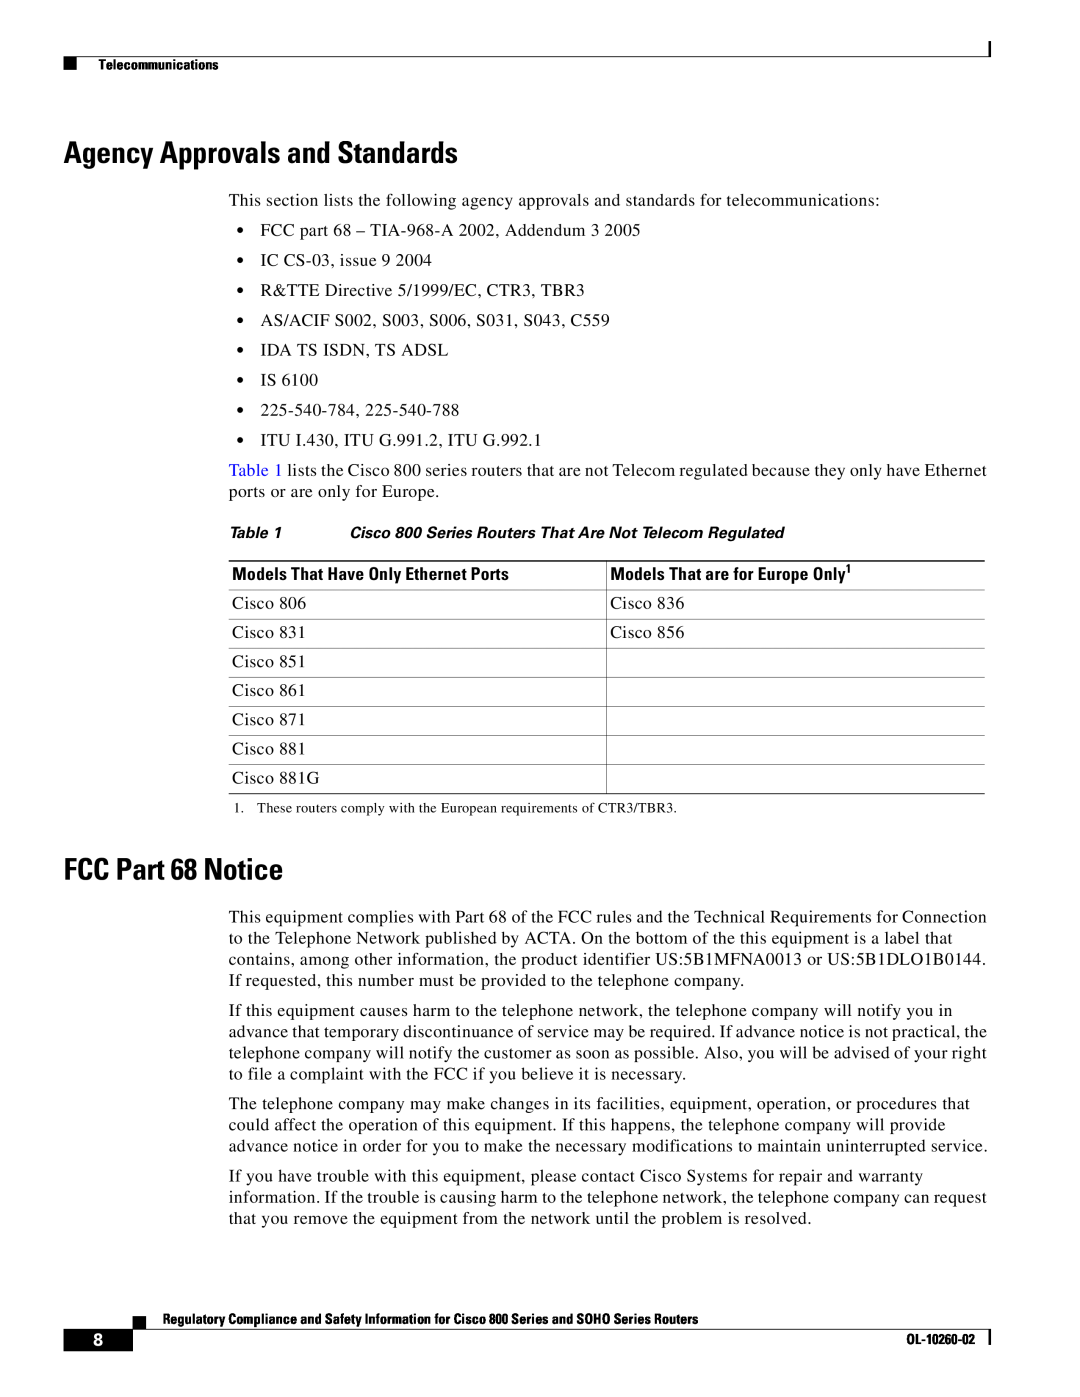 Cisco Systems SOHO Series manual FCC Part 68 Notice, Agency Approvals and Standards, Models That Have Only Ethernet Ports 